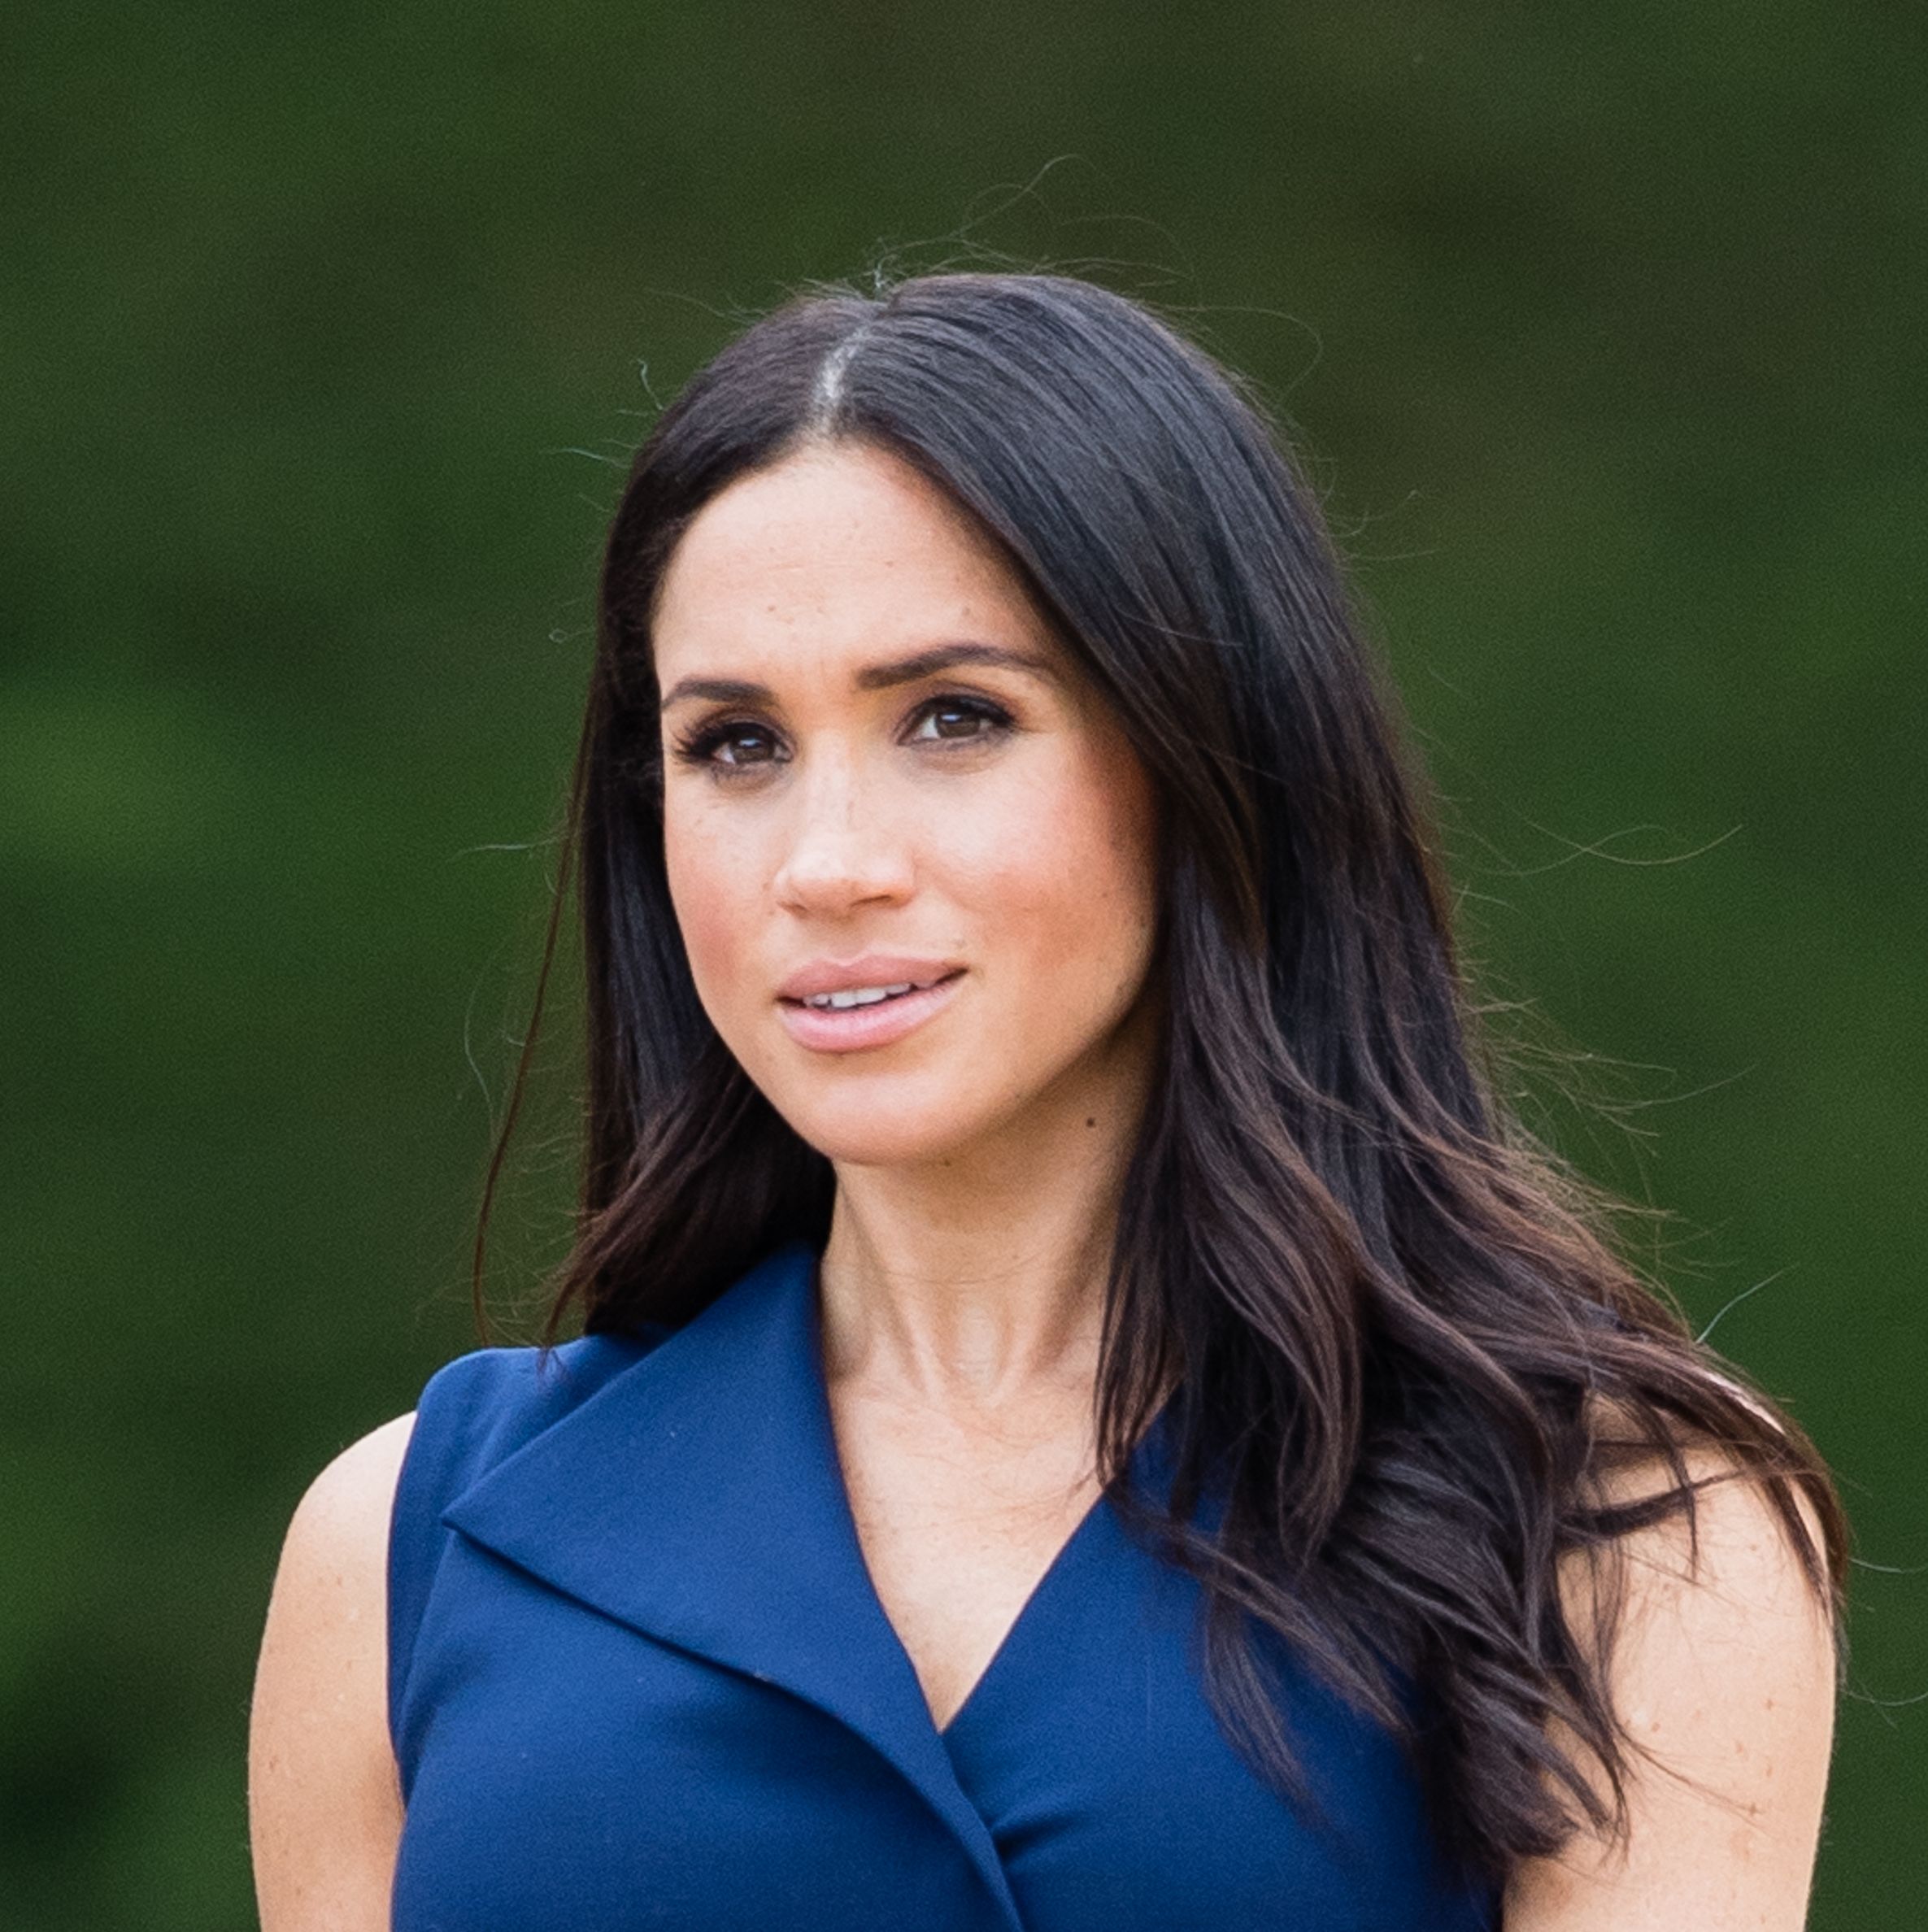 In the words of Meghan herself, “I think forgiveness is really important. It takes a lot more energy to not forgive.”